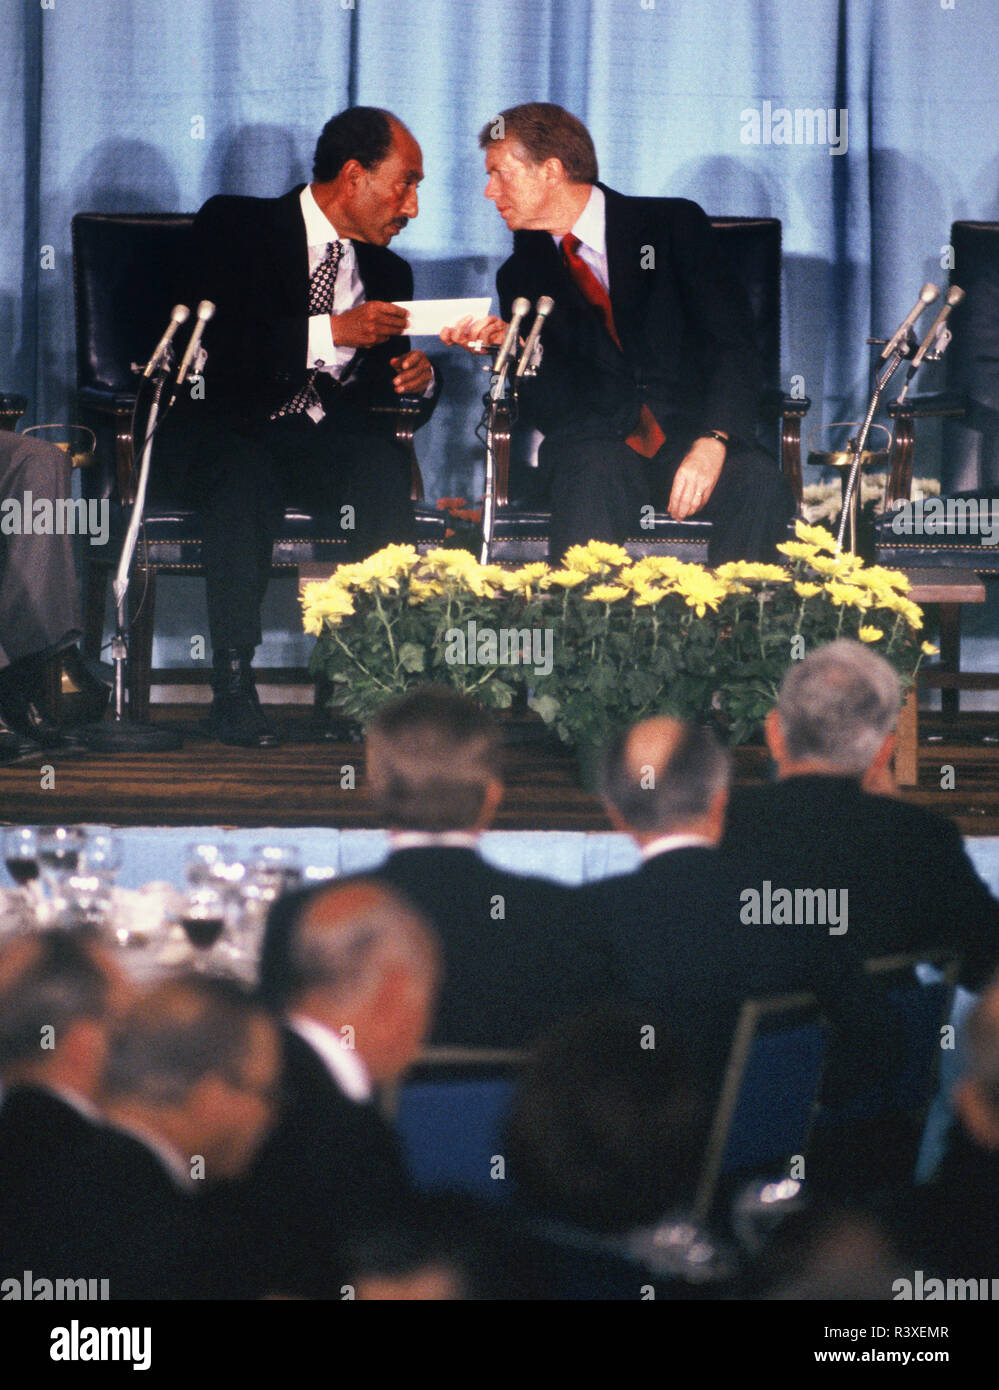 March 27,1979: Jimmy Carter and Anwar Sadat at the US Chamber of Commerce. Stock Photo